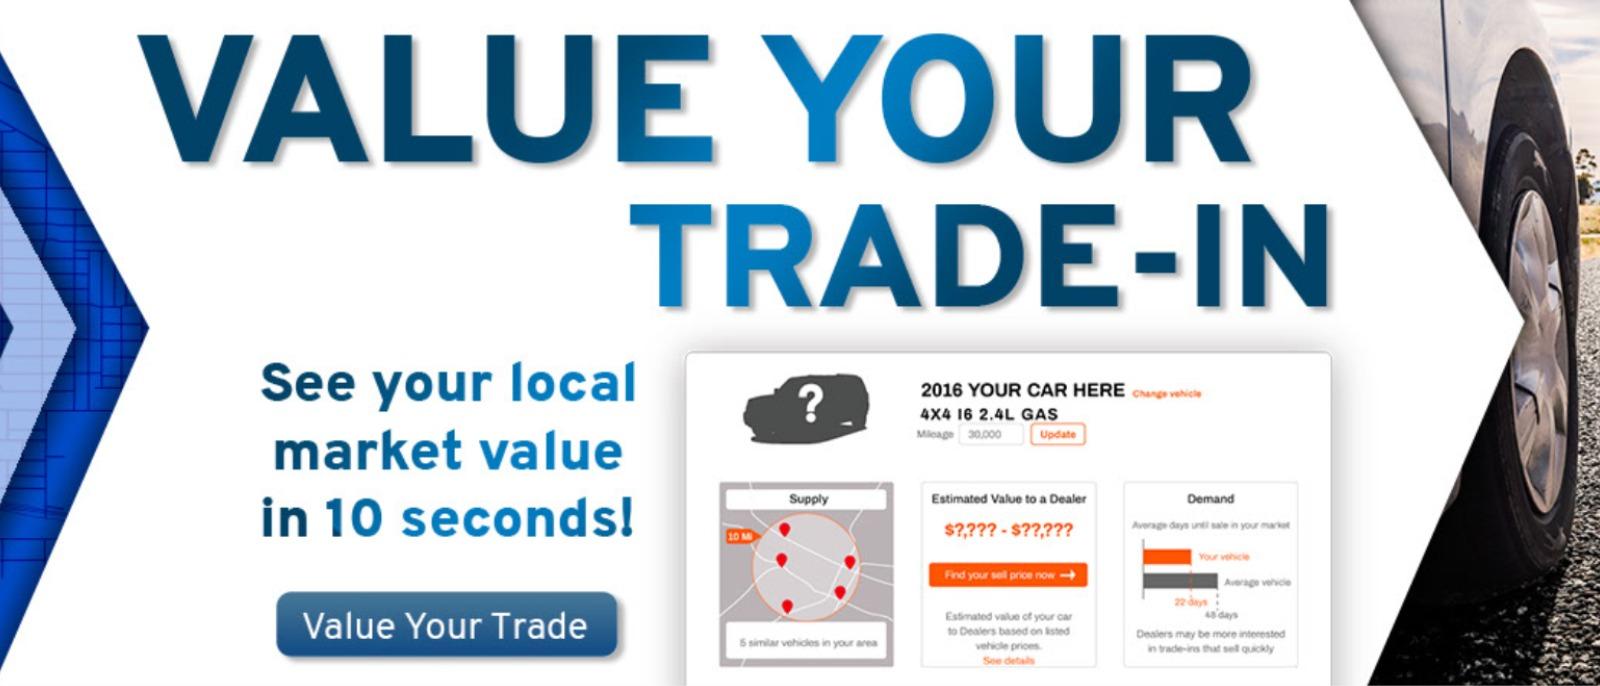 Value Your Trade-In | See Your local market value in 10 seconds